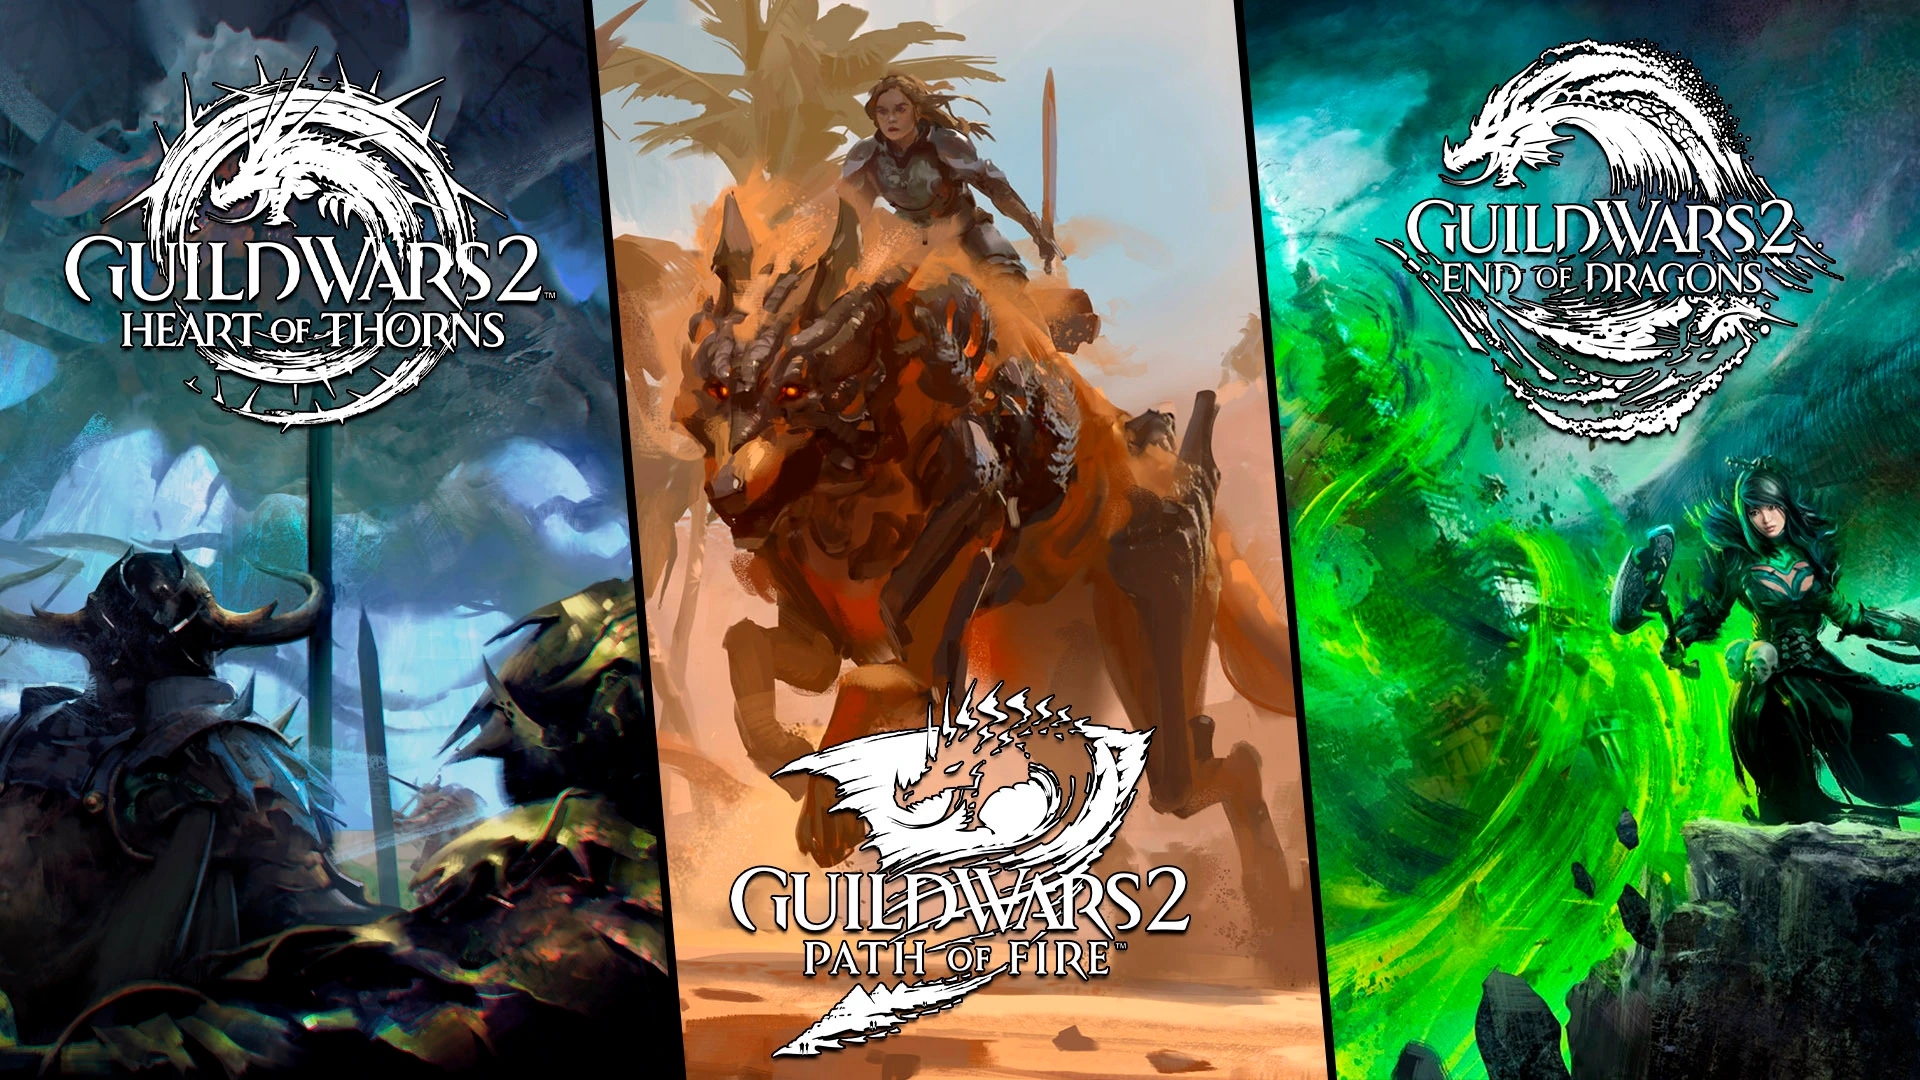 The Guild Wars 2 Logos are just PURE ART. : r/Guildwars2